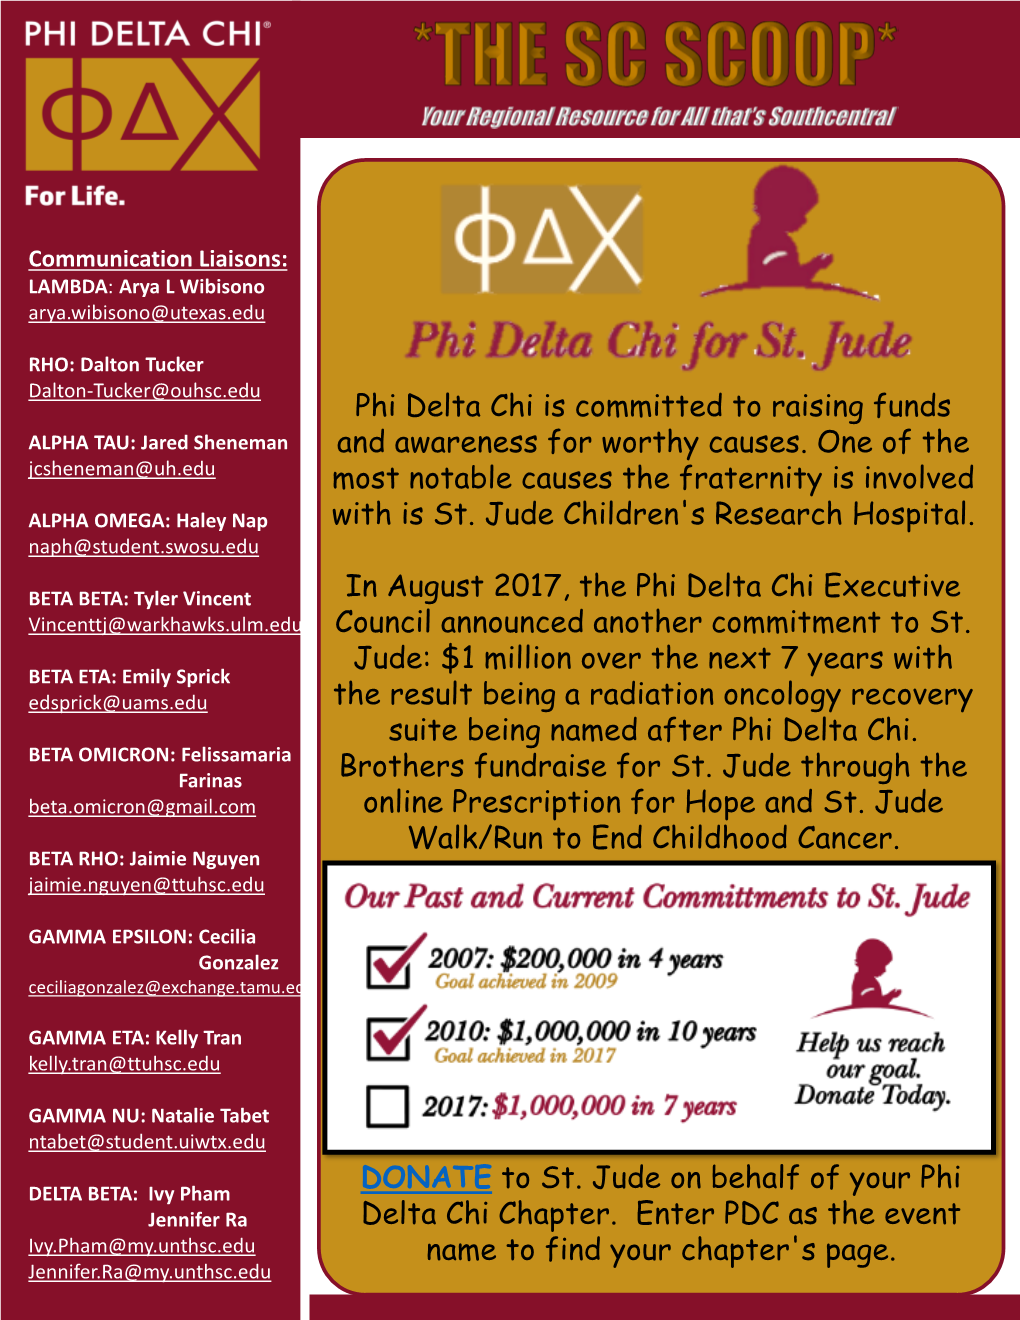 Phi Delta Chi Is Committed to Raising Funds and Awareness for Worthy